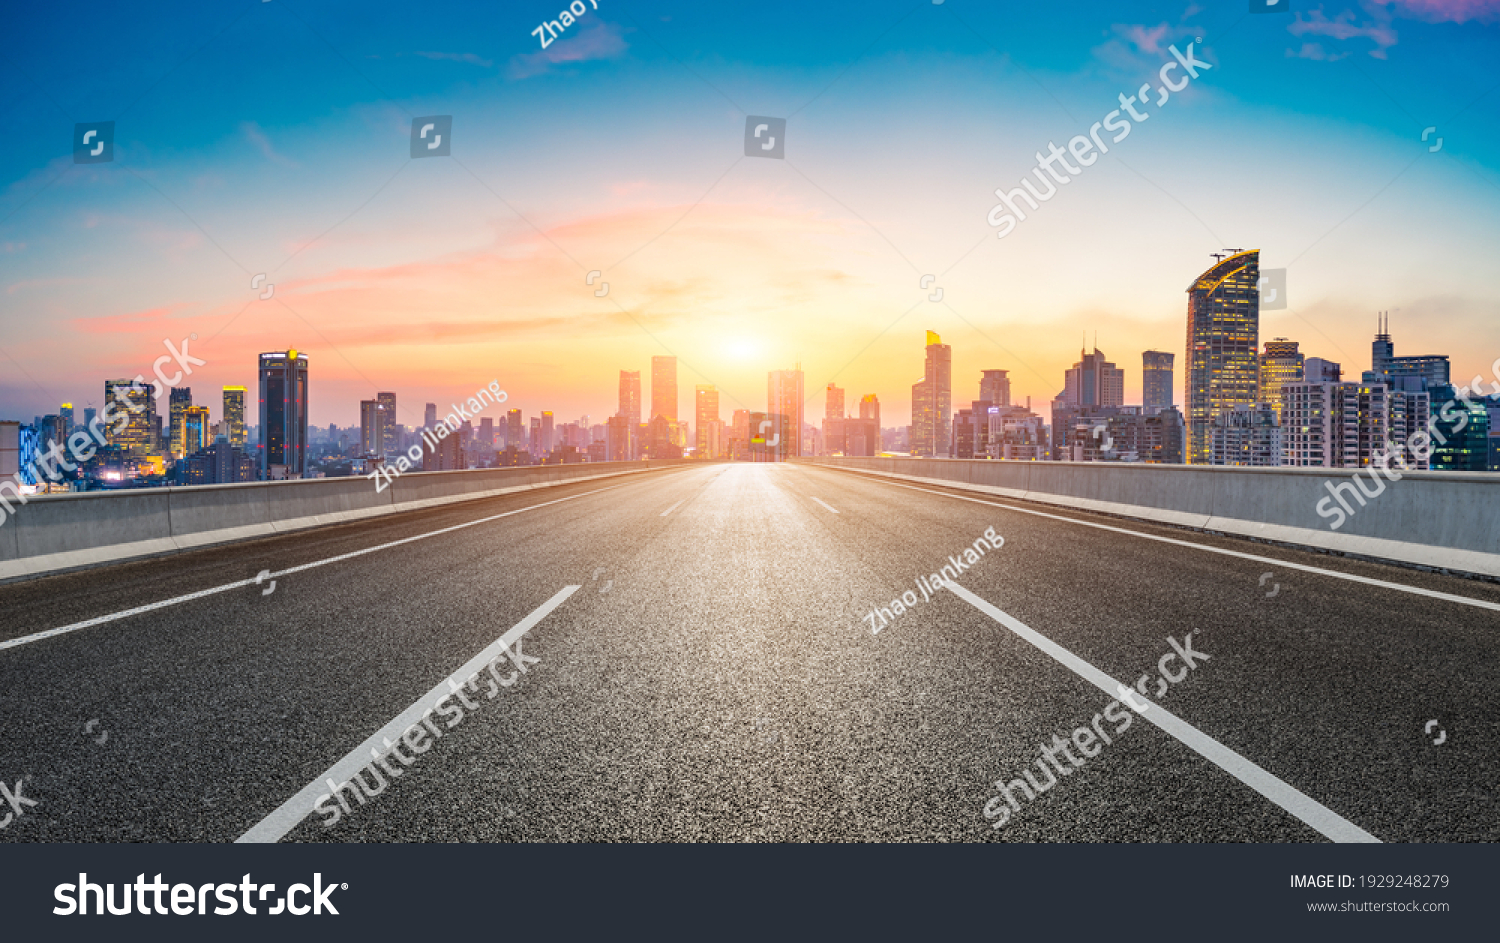 Empty asphalt road and city skyline with buildings at sunset in Shanghai. #1929248279